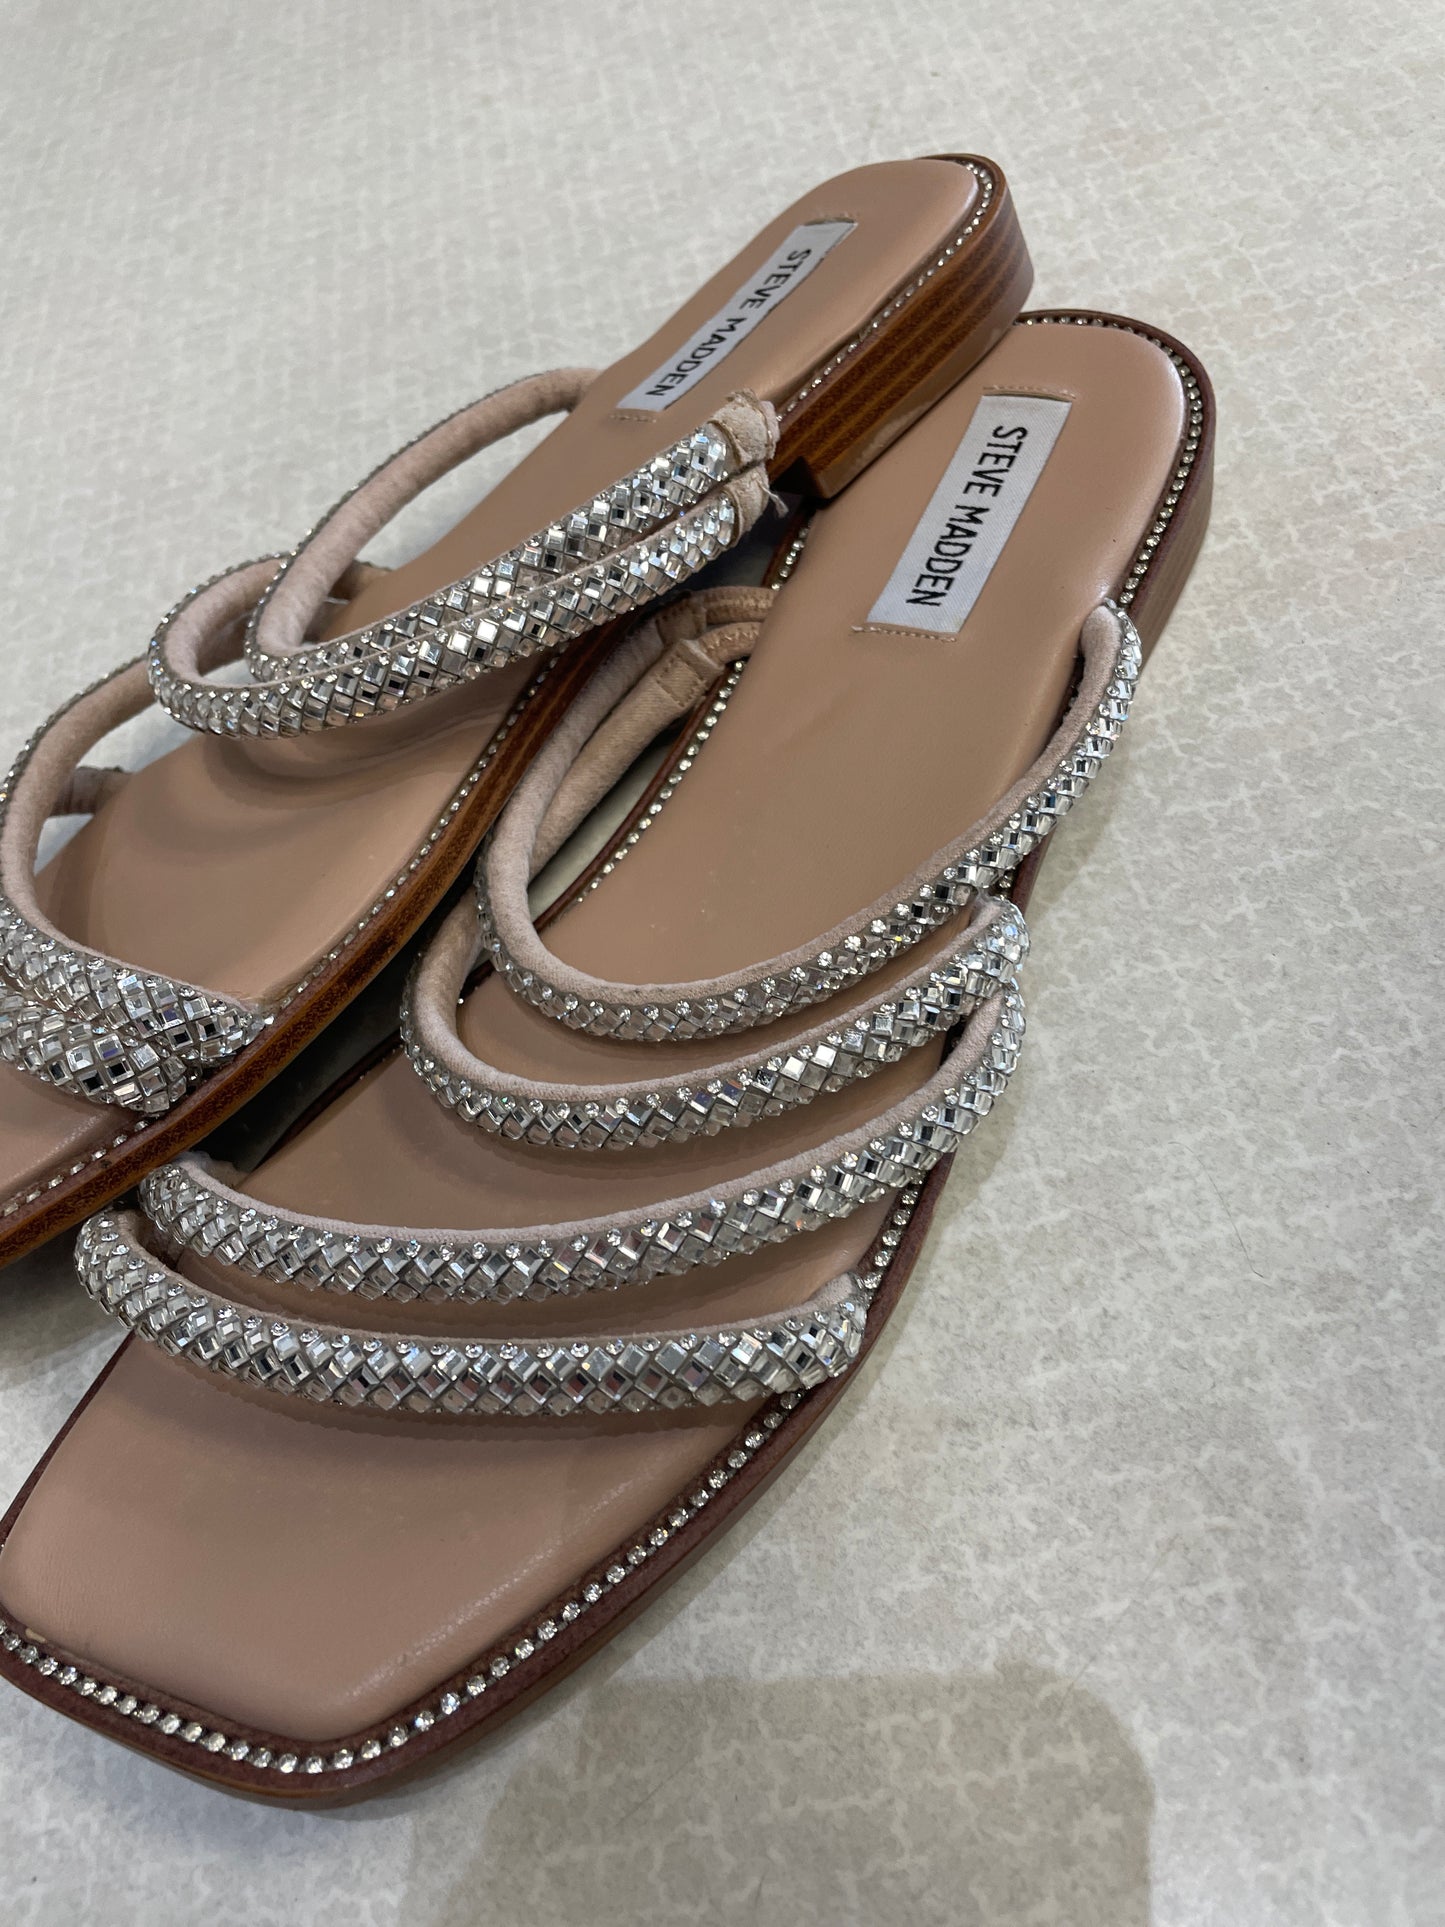 Sandals Flats By Steve Madden  Size: 9.5